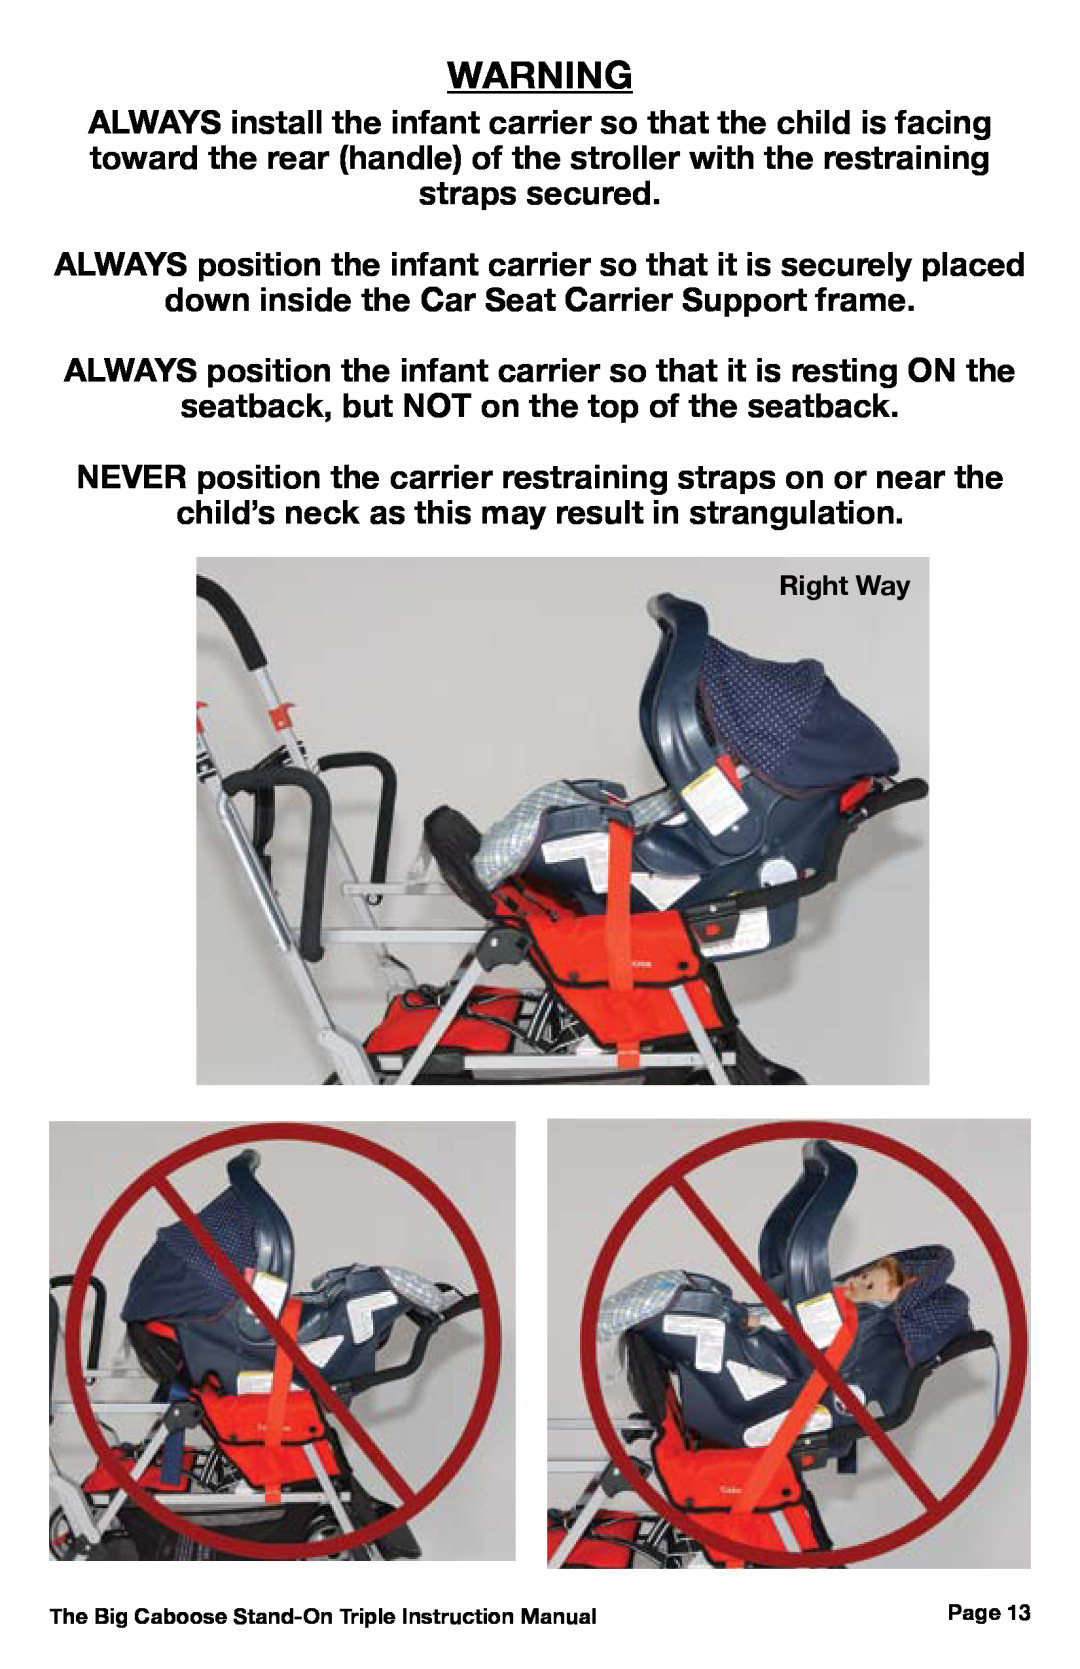 Chicco 430 ALWAYS position the infant carrier so that it is securely placed, seatback, but NOT on the top of the seatback 